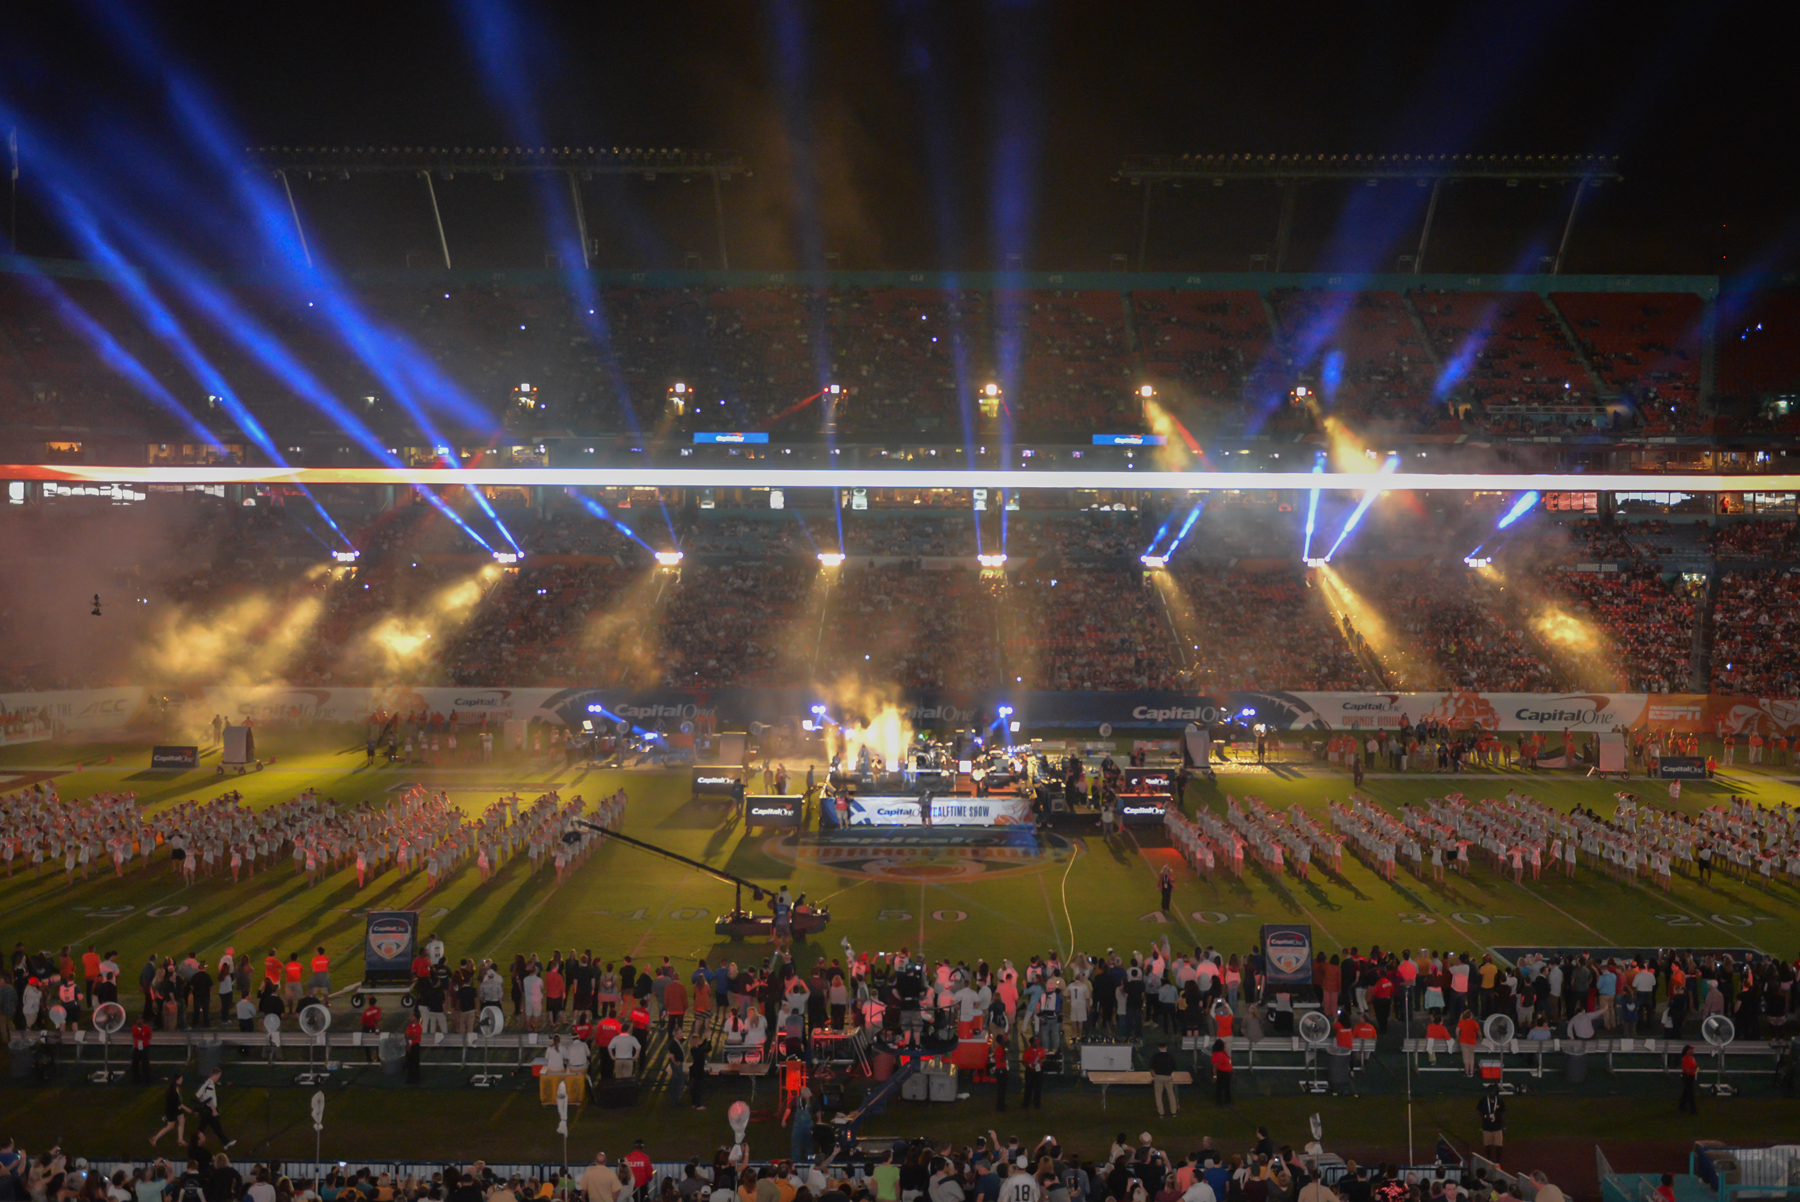 Design Oasis and NEXUS Makes the Orange Bowl Halftime Show AWESOME